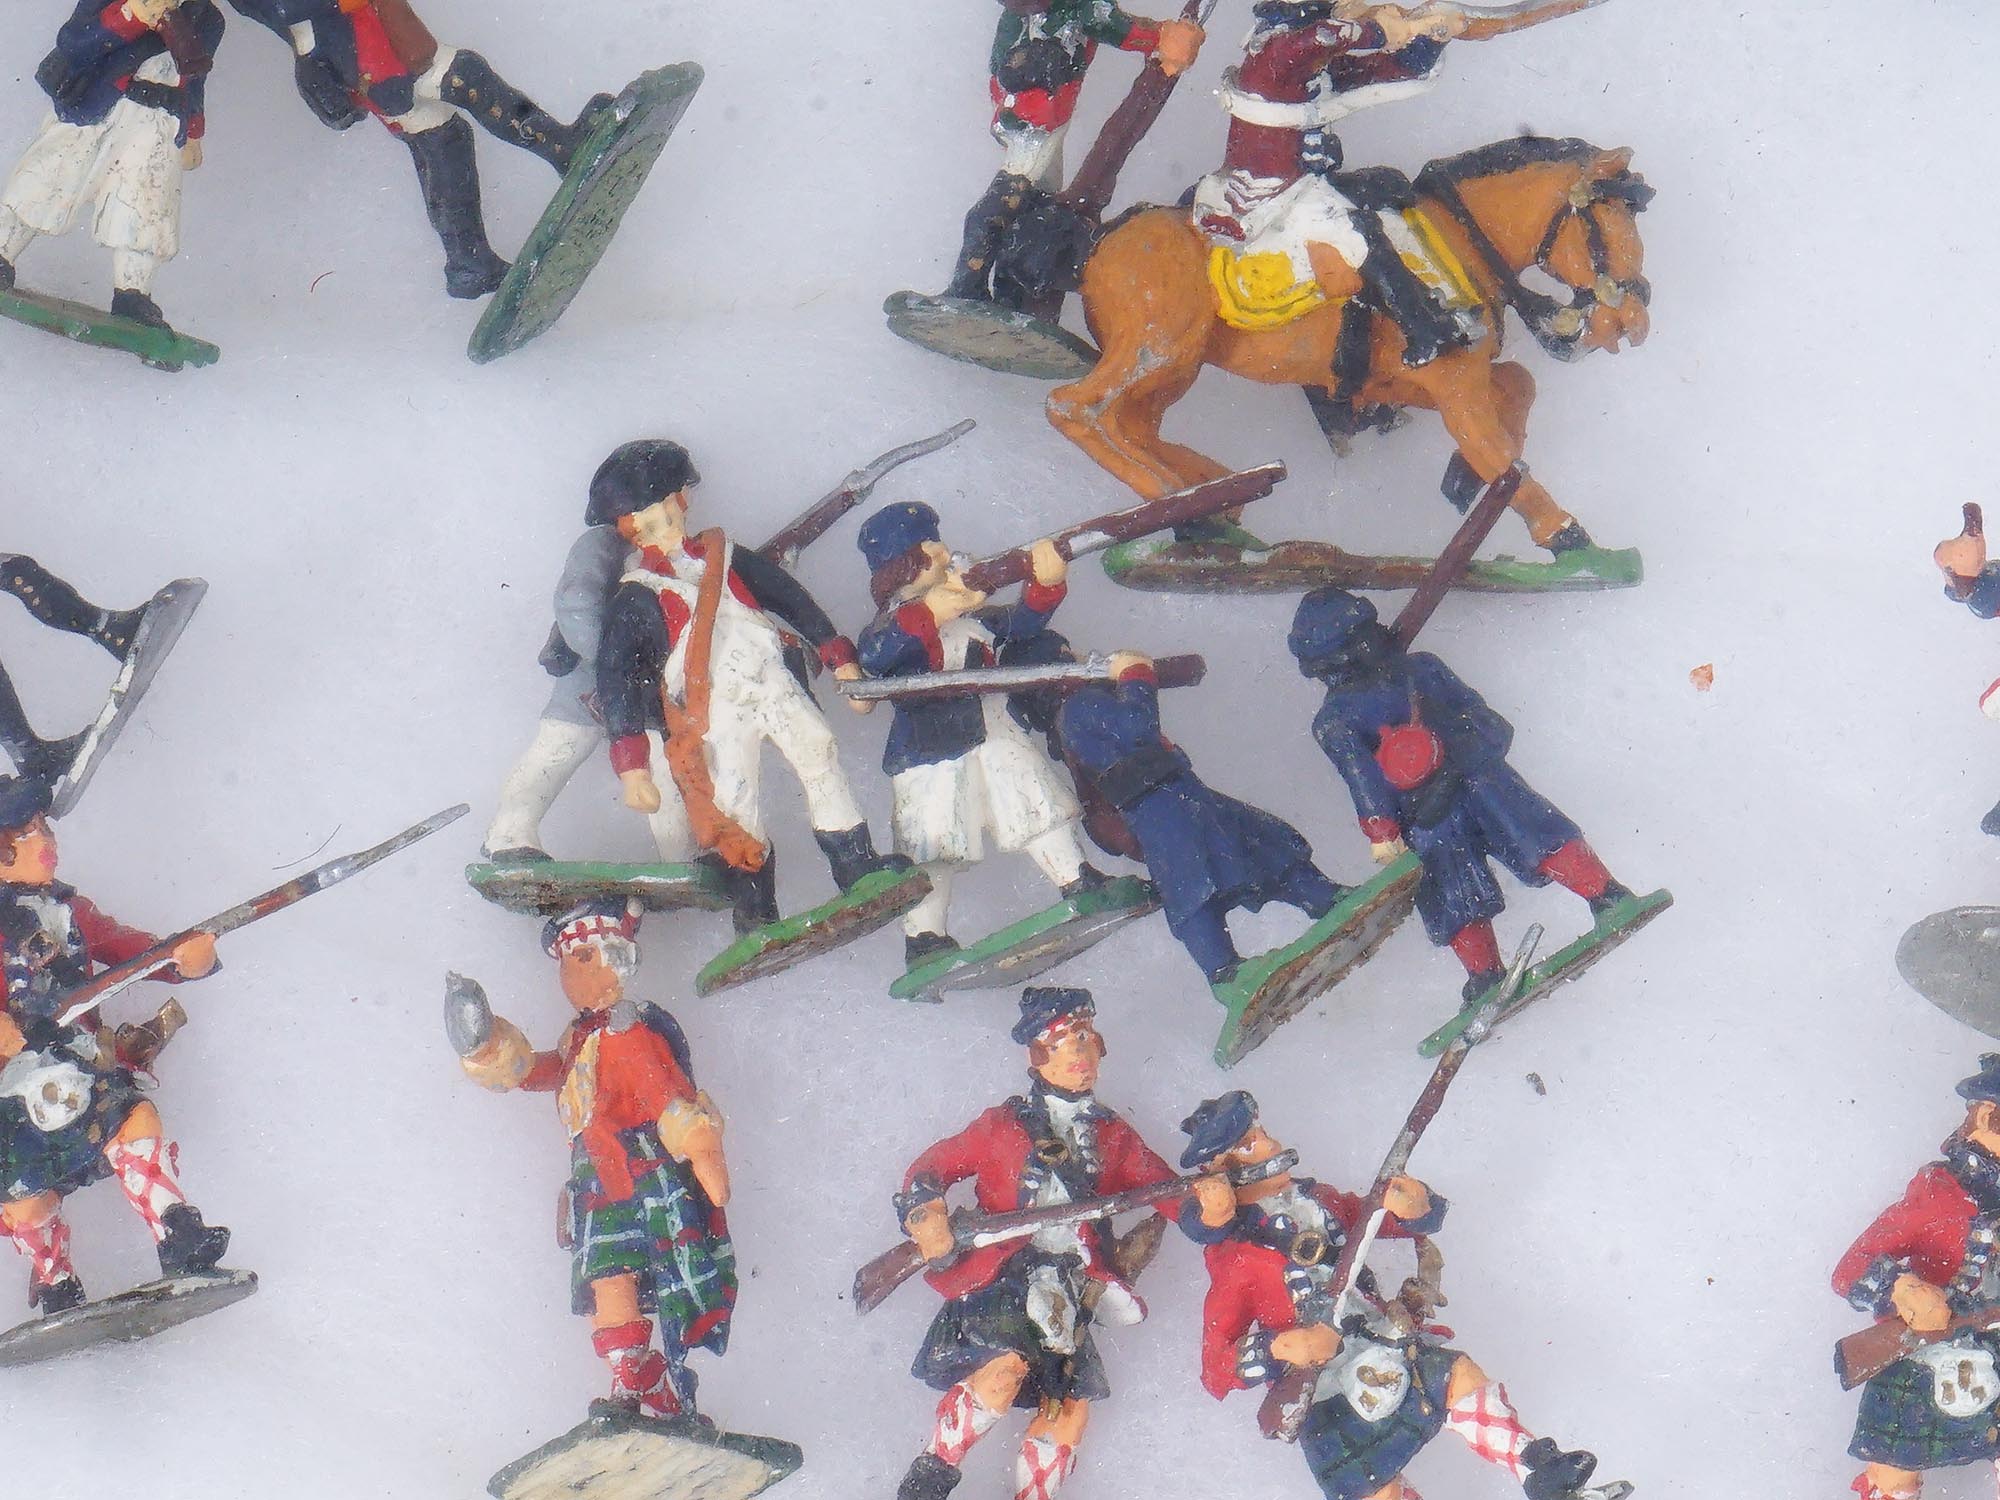 ANTIQUE MILITARY TOY SOLDIERS 1776 AMERICAN REVOLUTION PIC-4